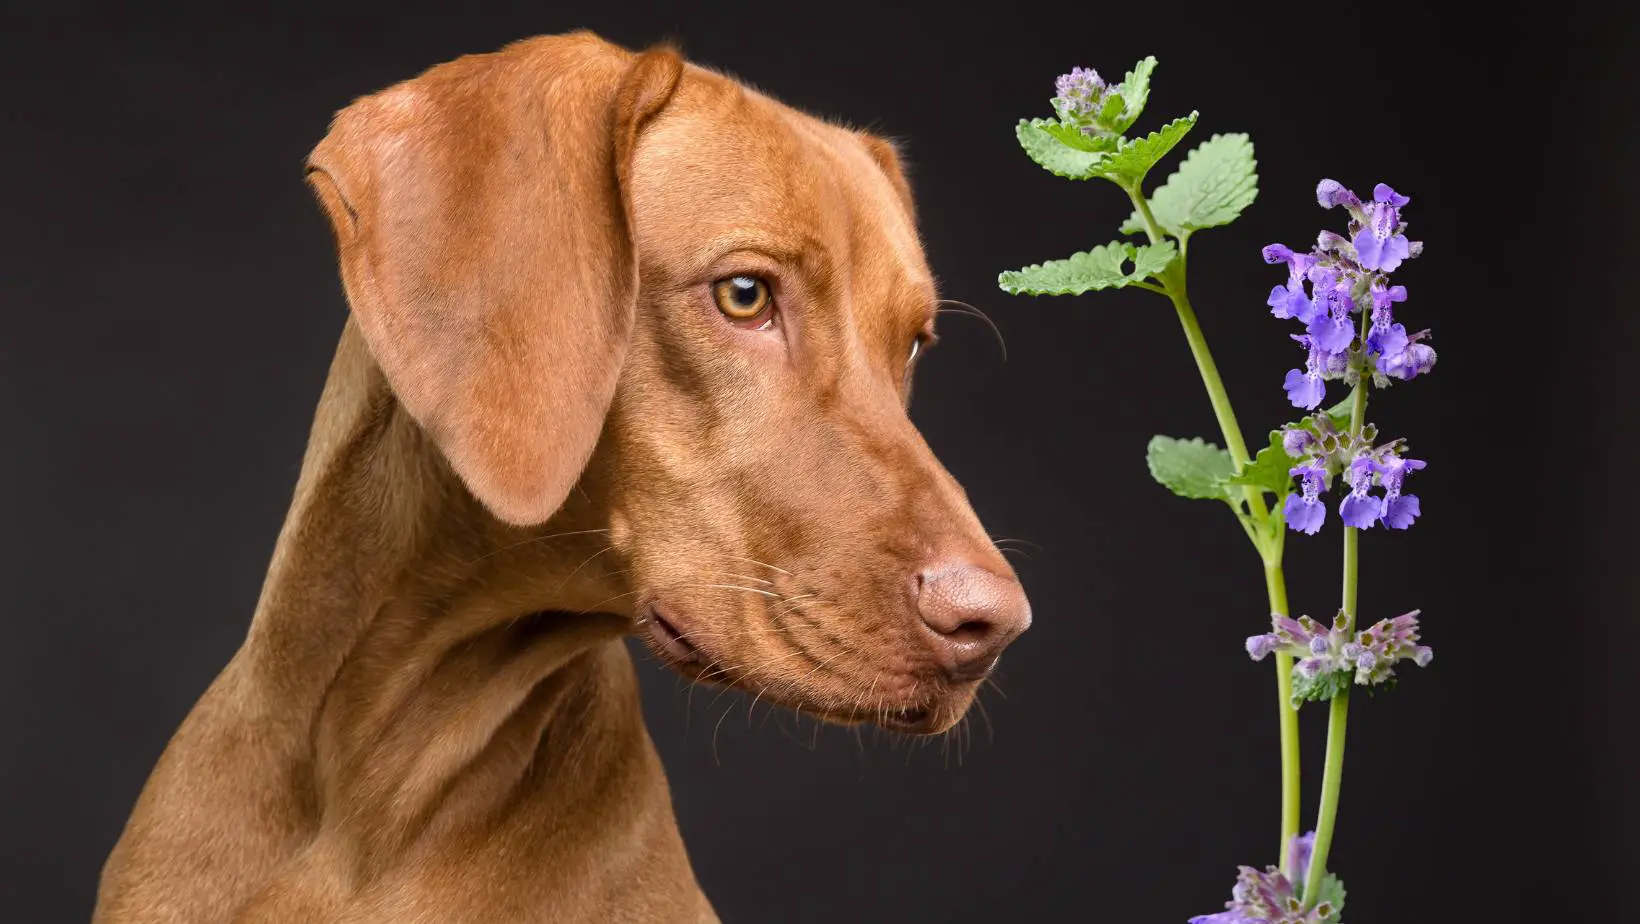 Does Cat Nip Affect Dogs?